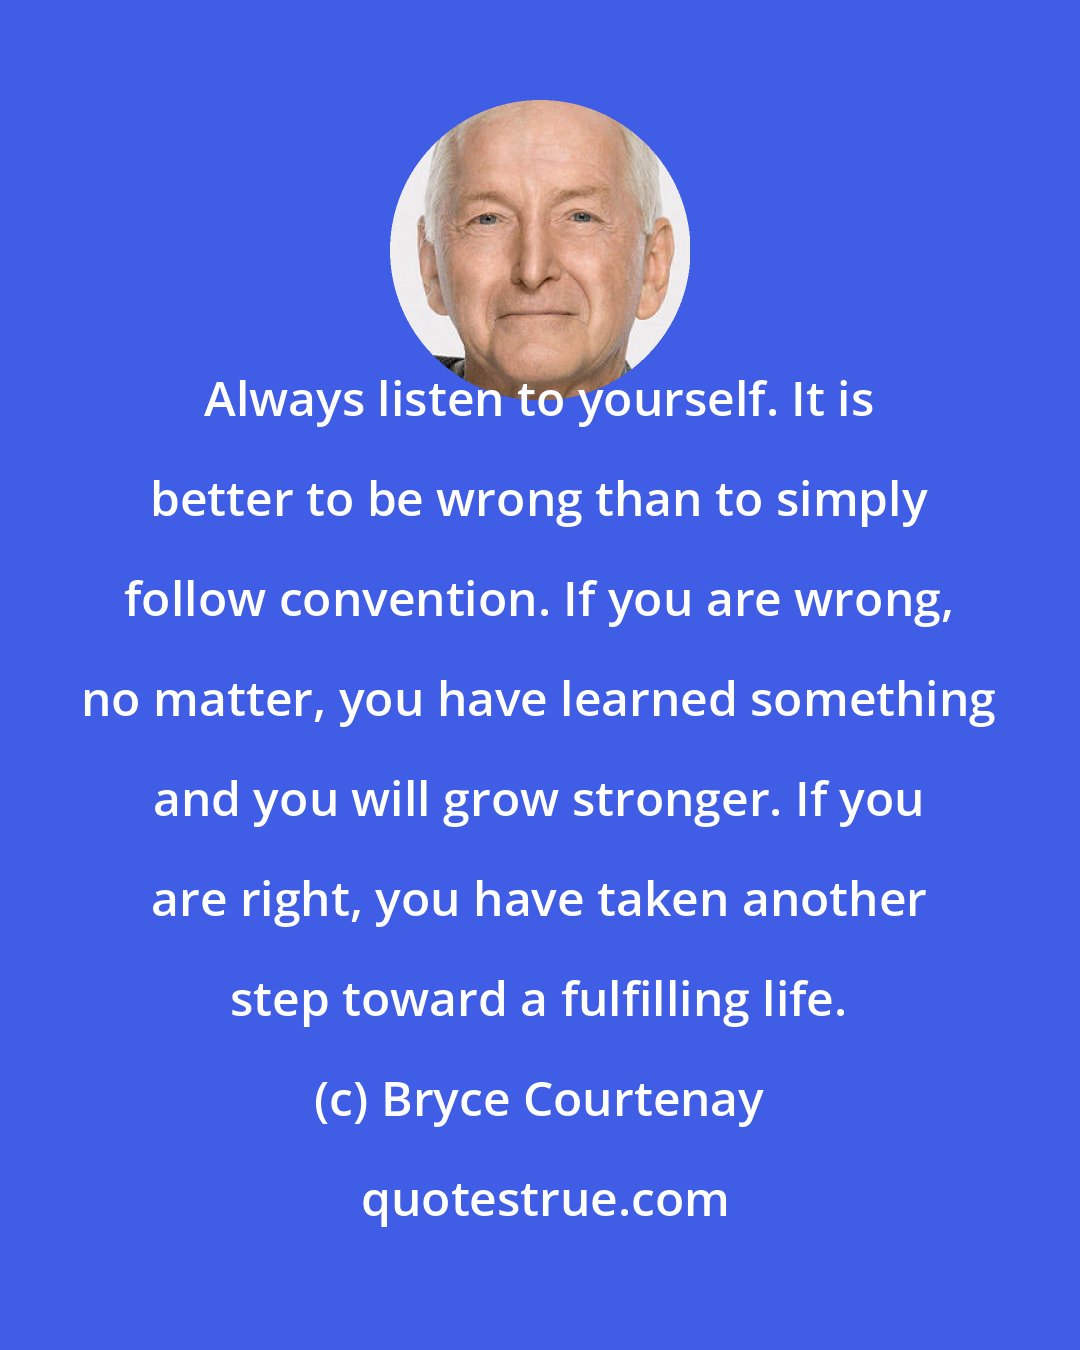 Bryce Courtenay: Always listen to yourself. It is better to be wrong than to simply follow convention. If you are wrong, no matter, you have learned something and you will grow stronger. If you are right, you have taken another step toward a fulfilling life.